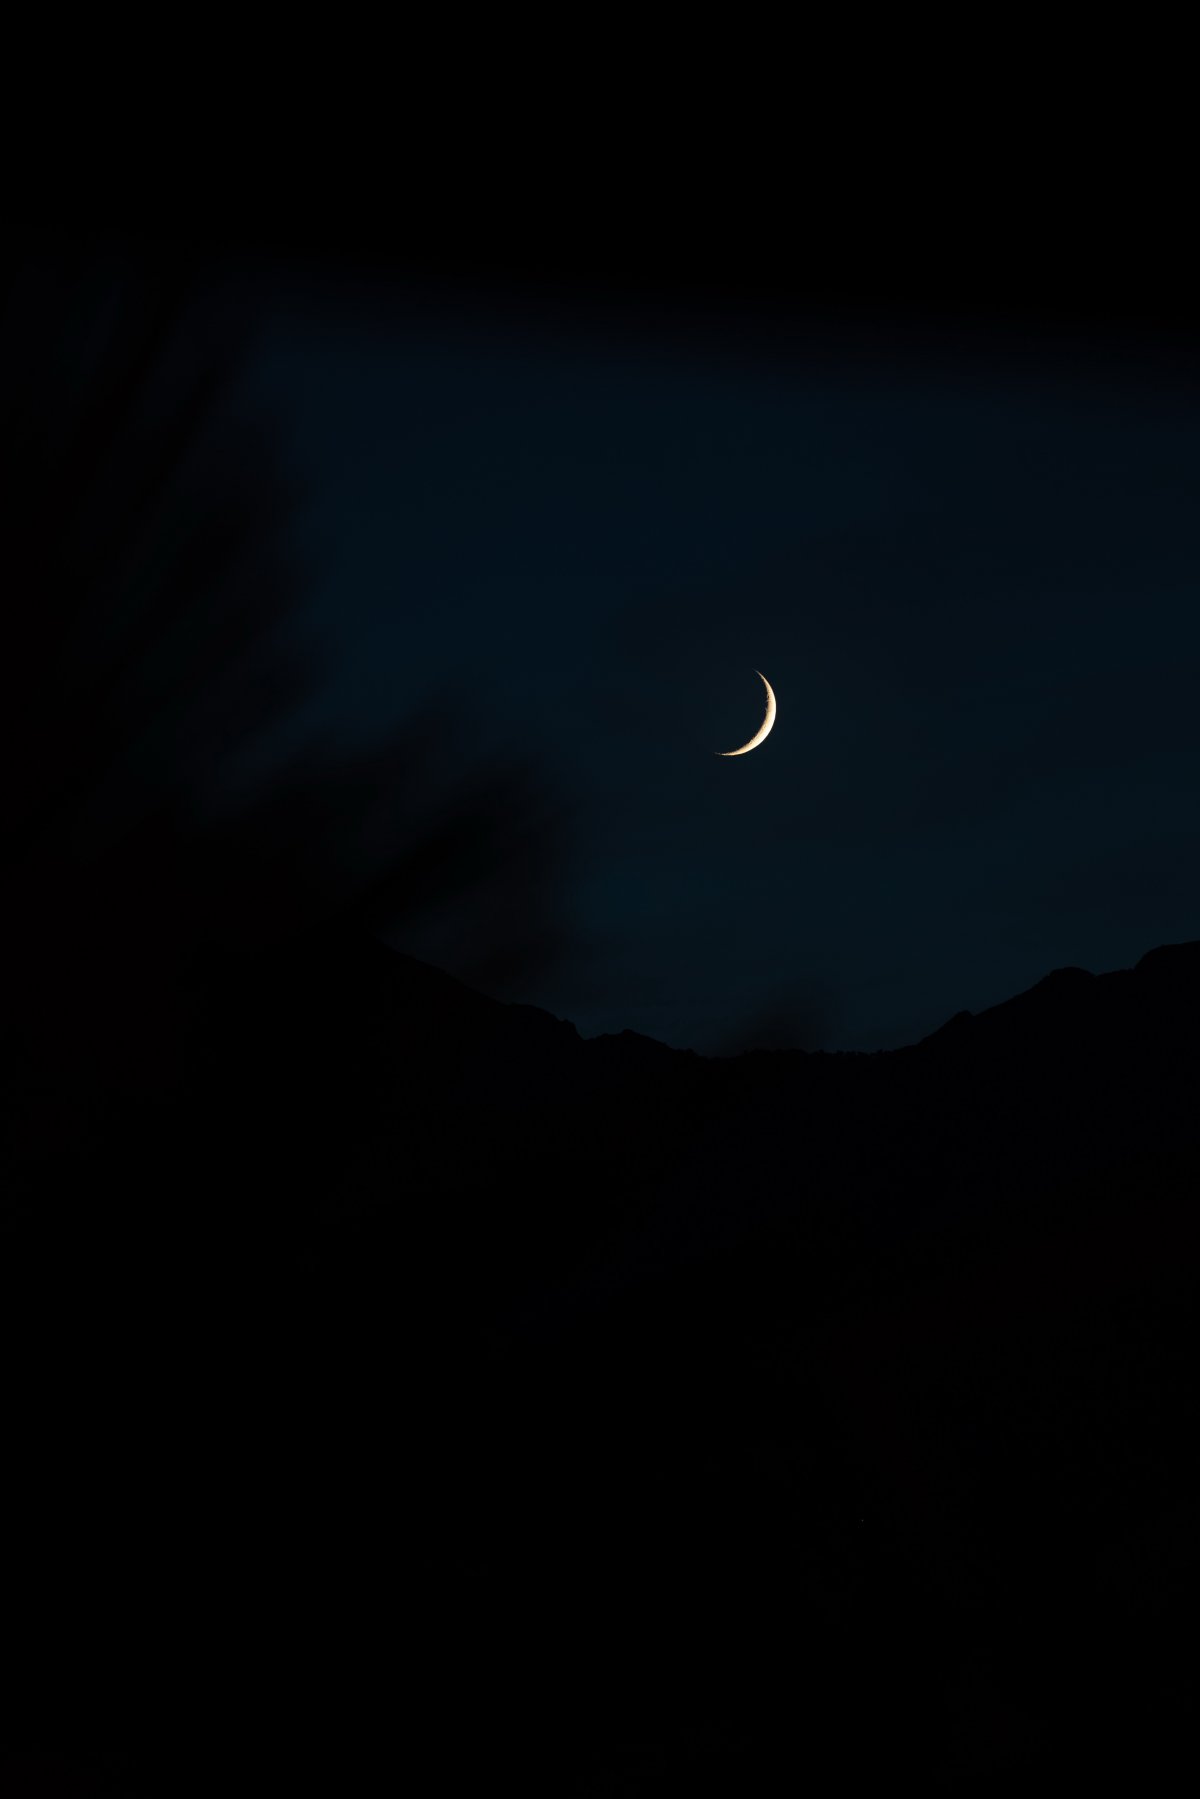 crescent moon picture in night sky